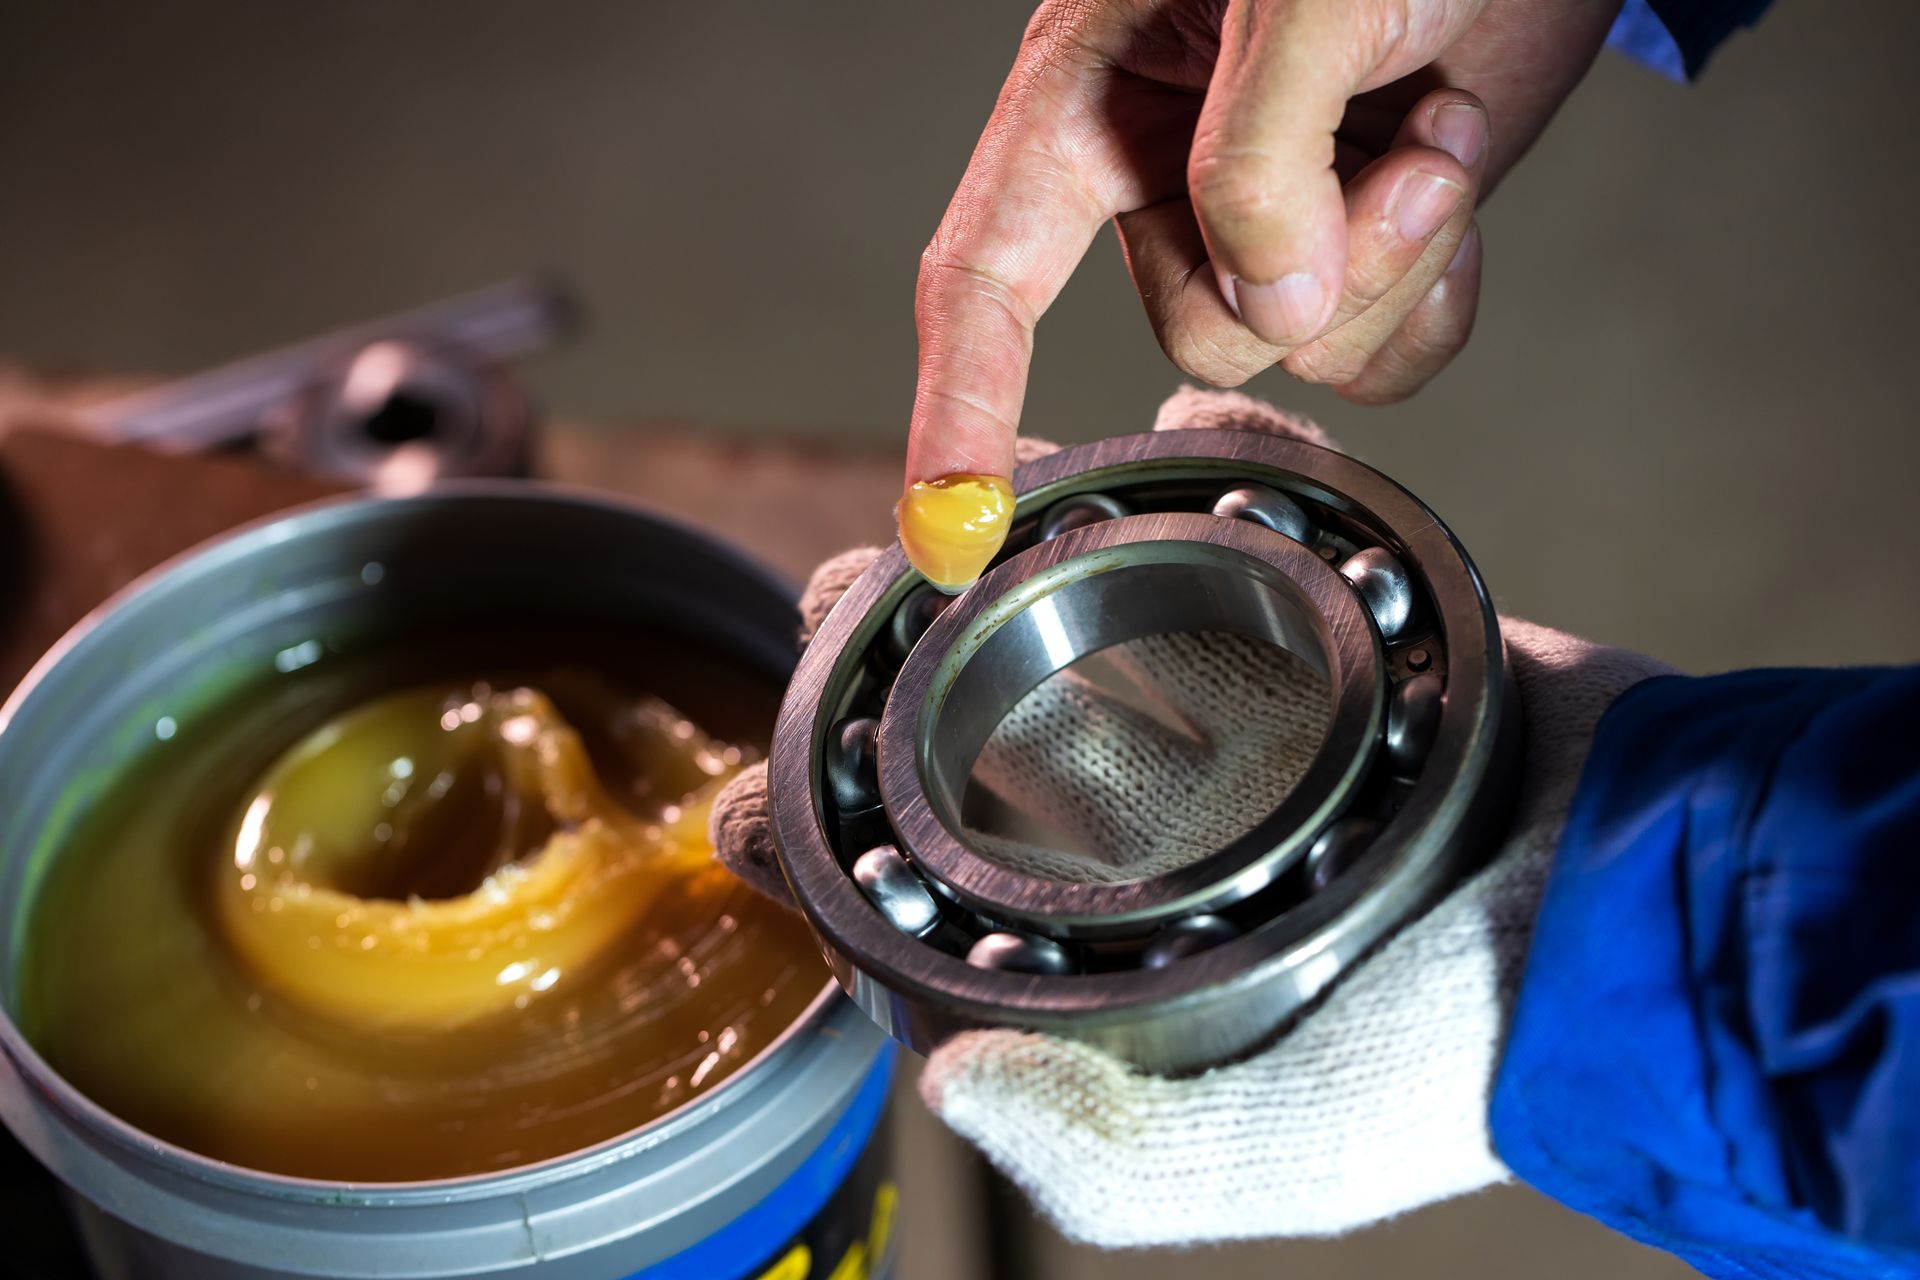 A person is applying grease to a bearing.